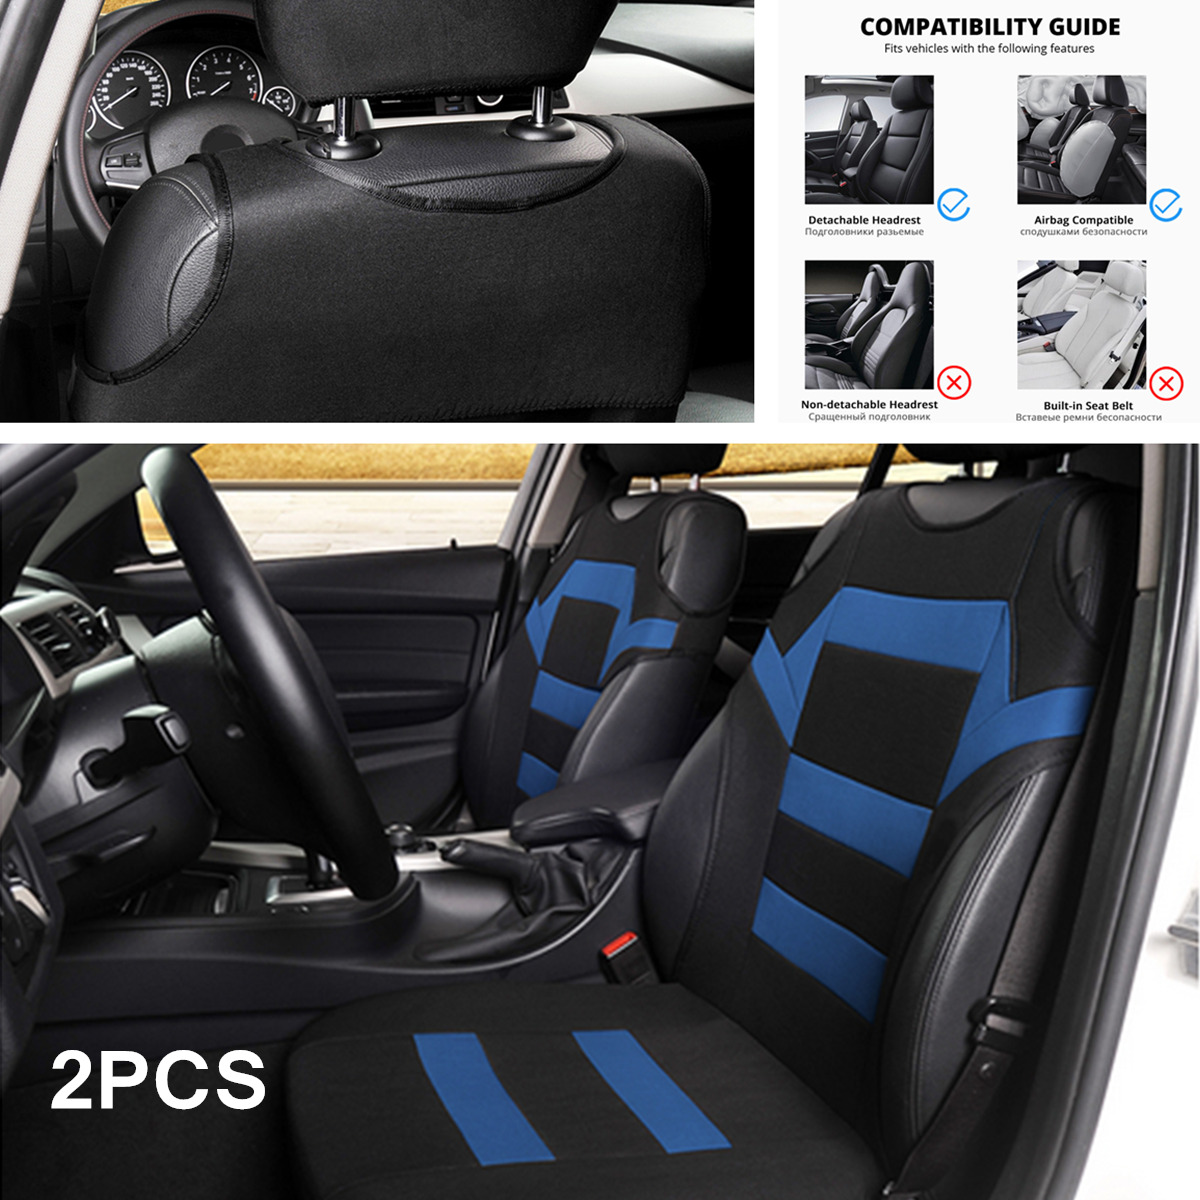 2x Car Front Seat Cover Universal Protector Car Accessories Interior Black/Blue